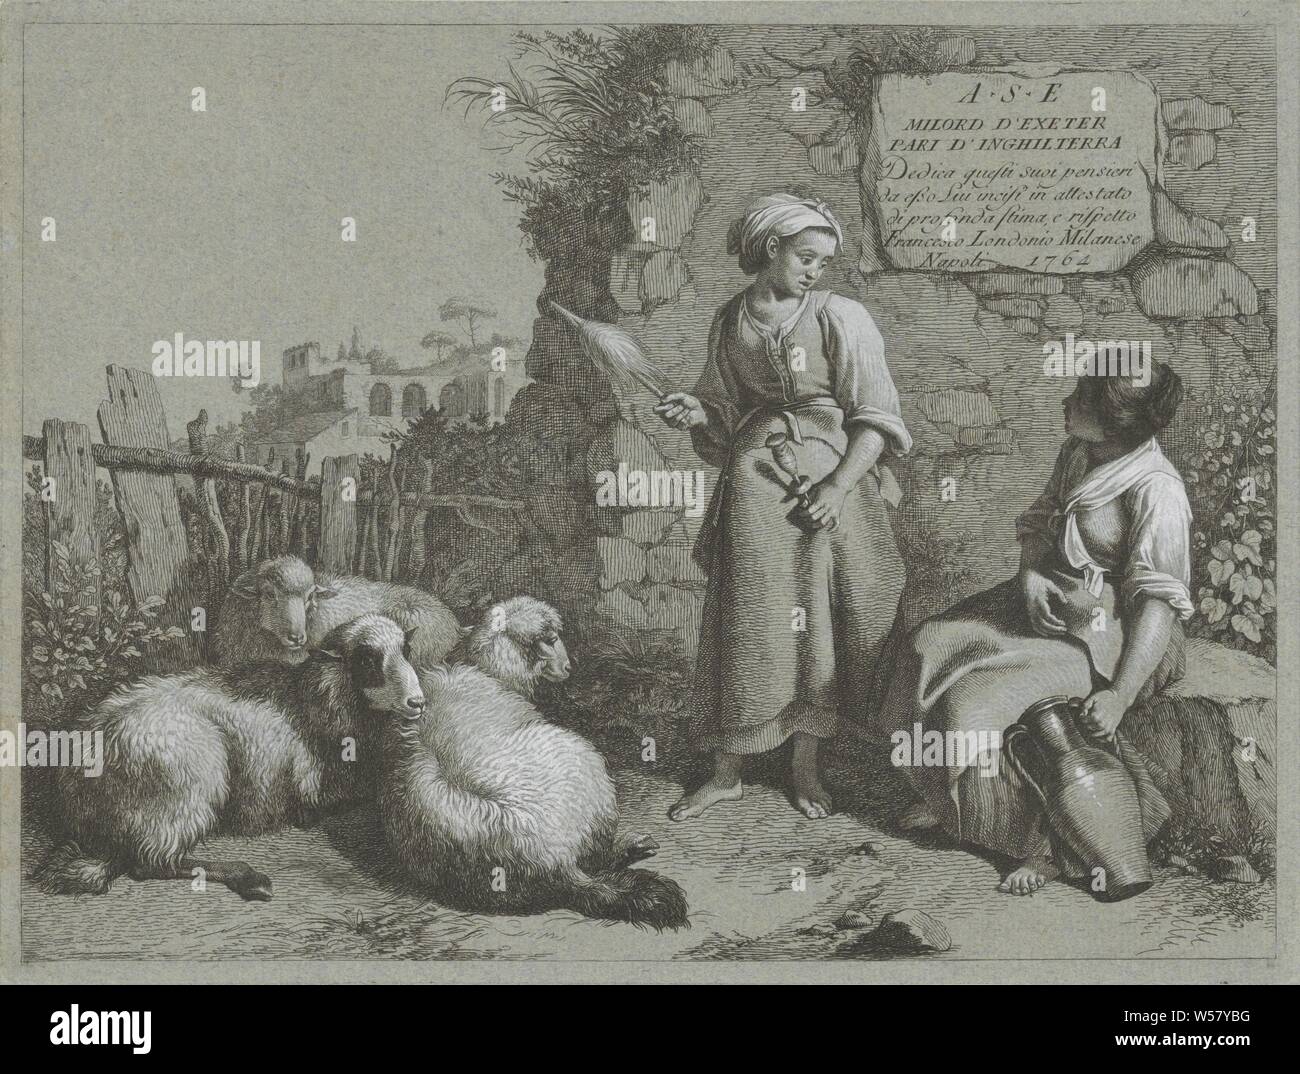 Two shepherdesses with three sheep Shepherd scenes (series title), Two shepherdesses, one with a spider and one with a jug, resting with three sheep in front of a wall, herding, herdsman, herdswoman, shepherd, shepherdess, cowherd, etc, herd, flock, Francesco Londonio (mentioned on object), 1764, paper, etching, h 218 mm × w 288 mm Stock Photo